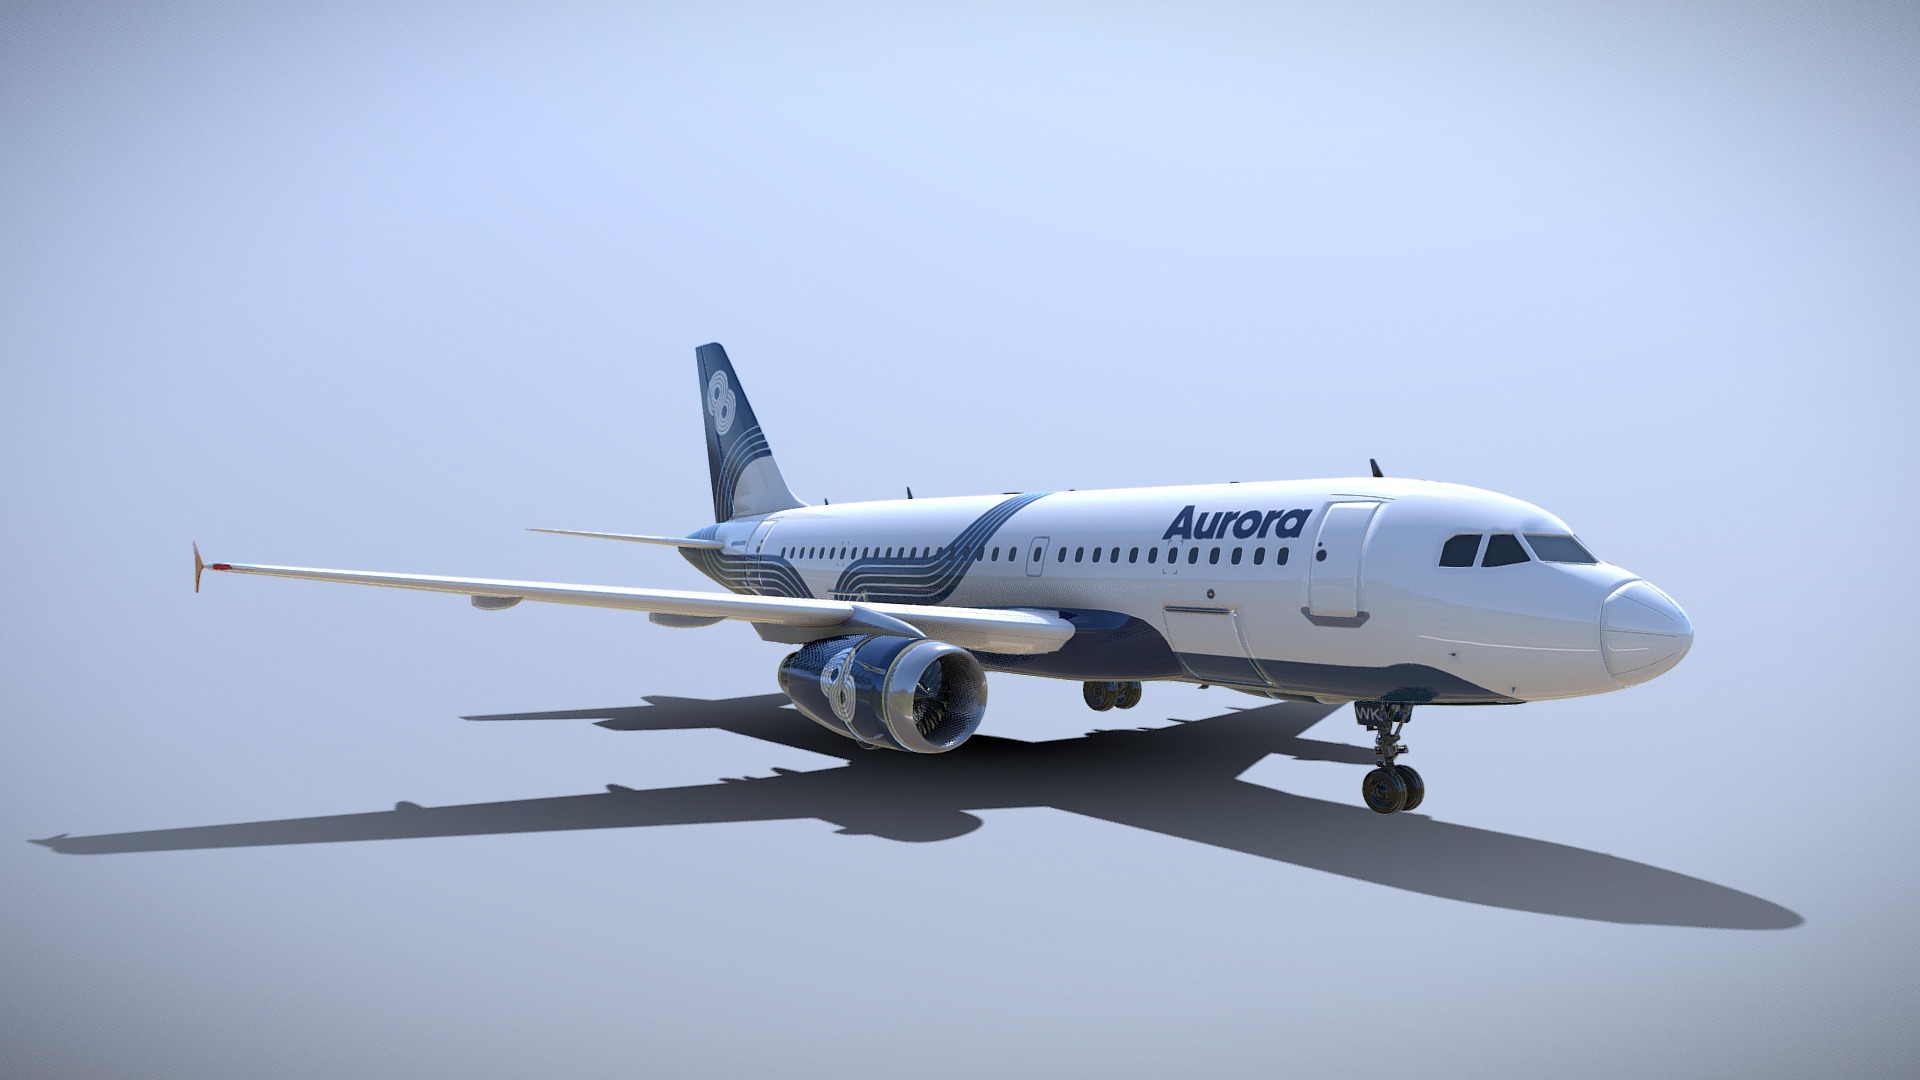 3D model Aurora Airlines Airbus A319 - This is a 3D model of the Aurora Airlines Airbus A319. The 3D model is about a large airplane flying in the sky.